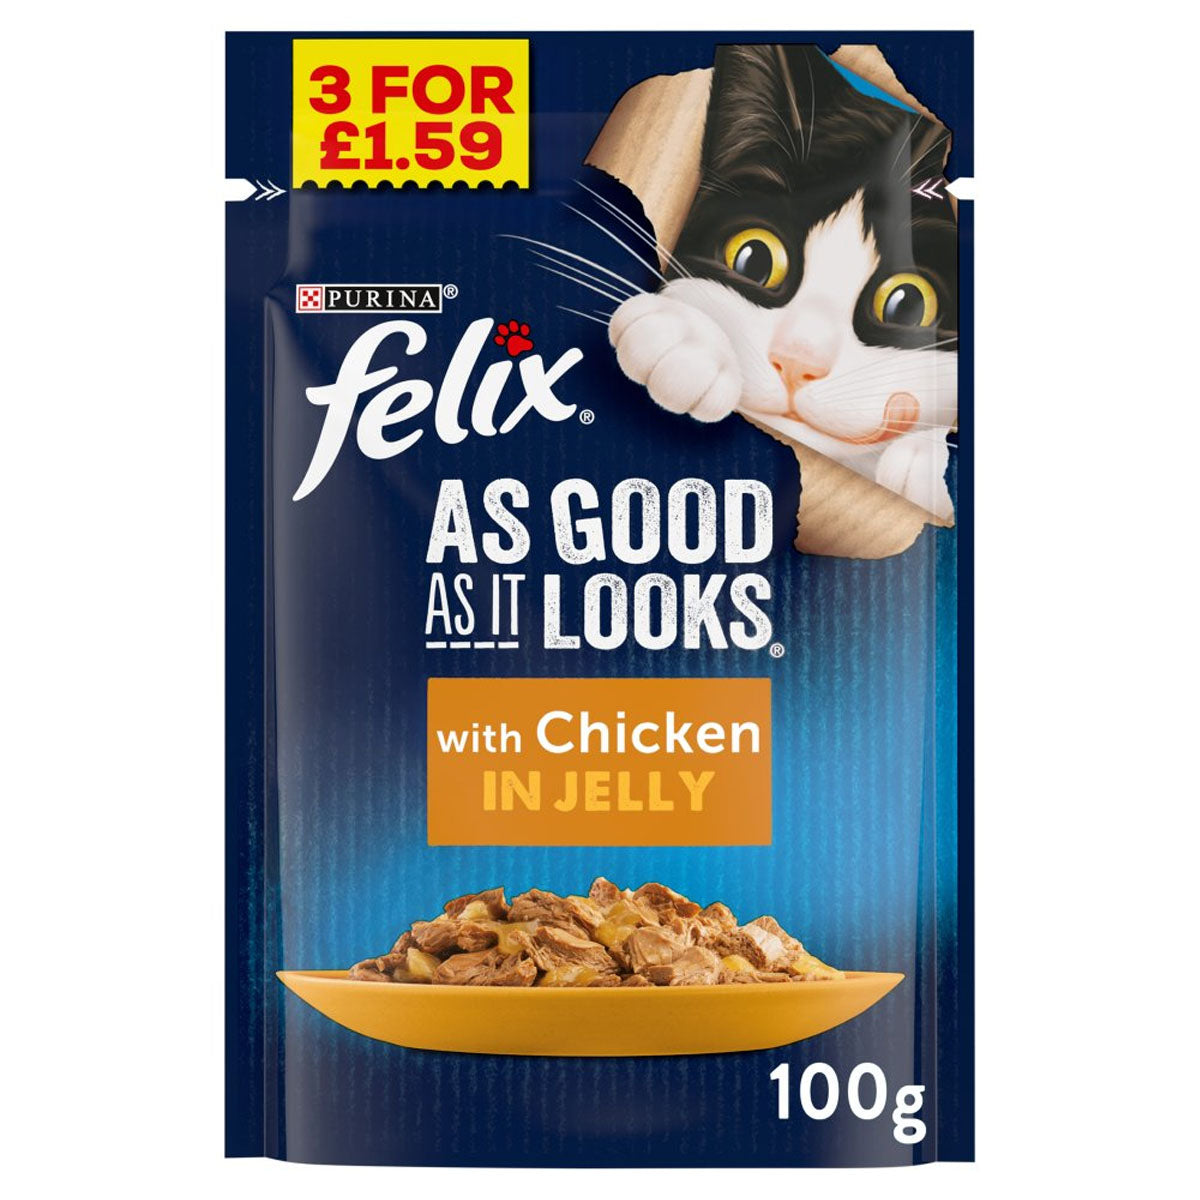 Felix - As Good As It Looks with Chicken in Jelly - 100g - Continental Food Store